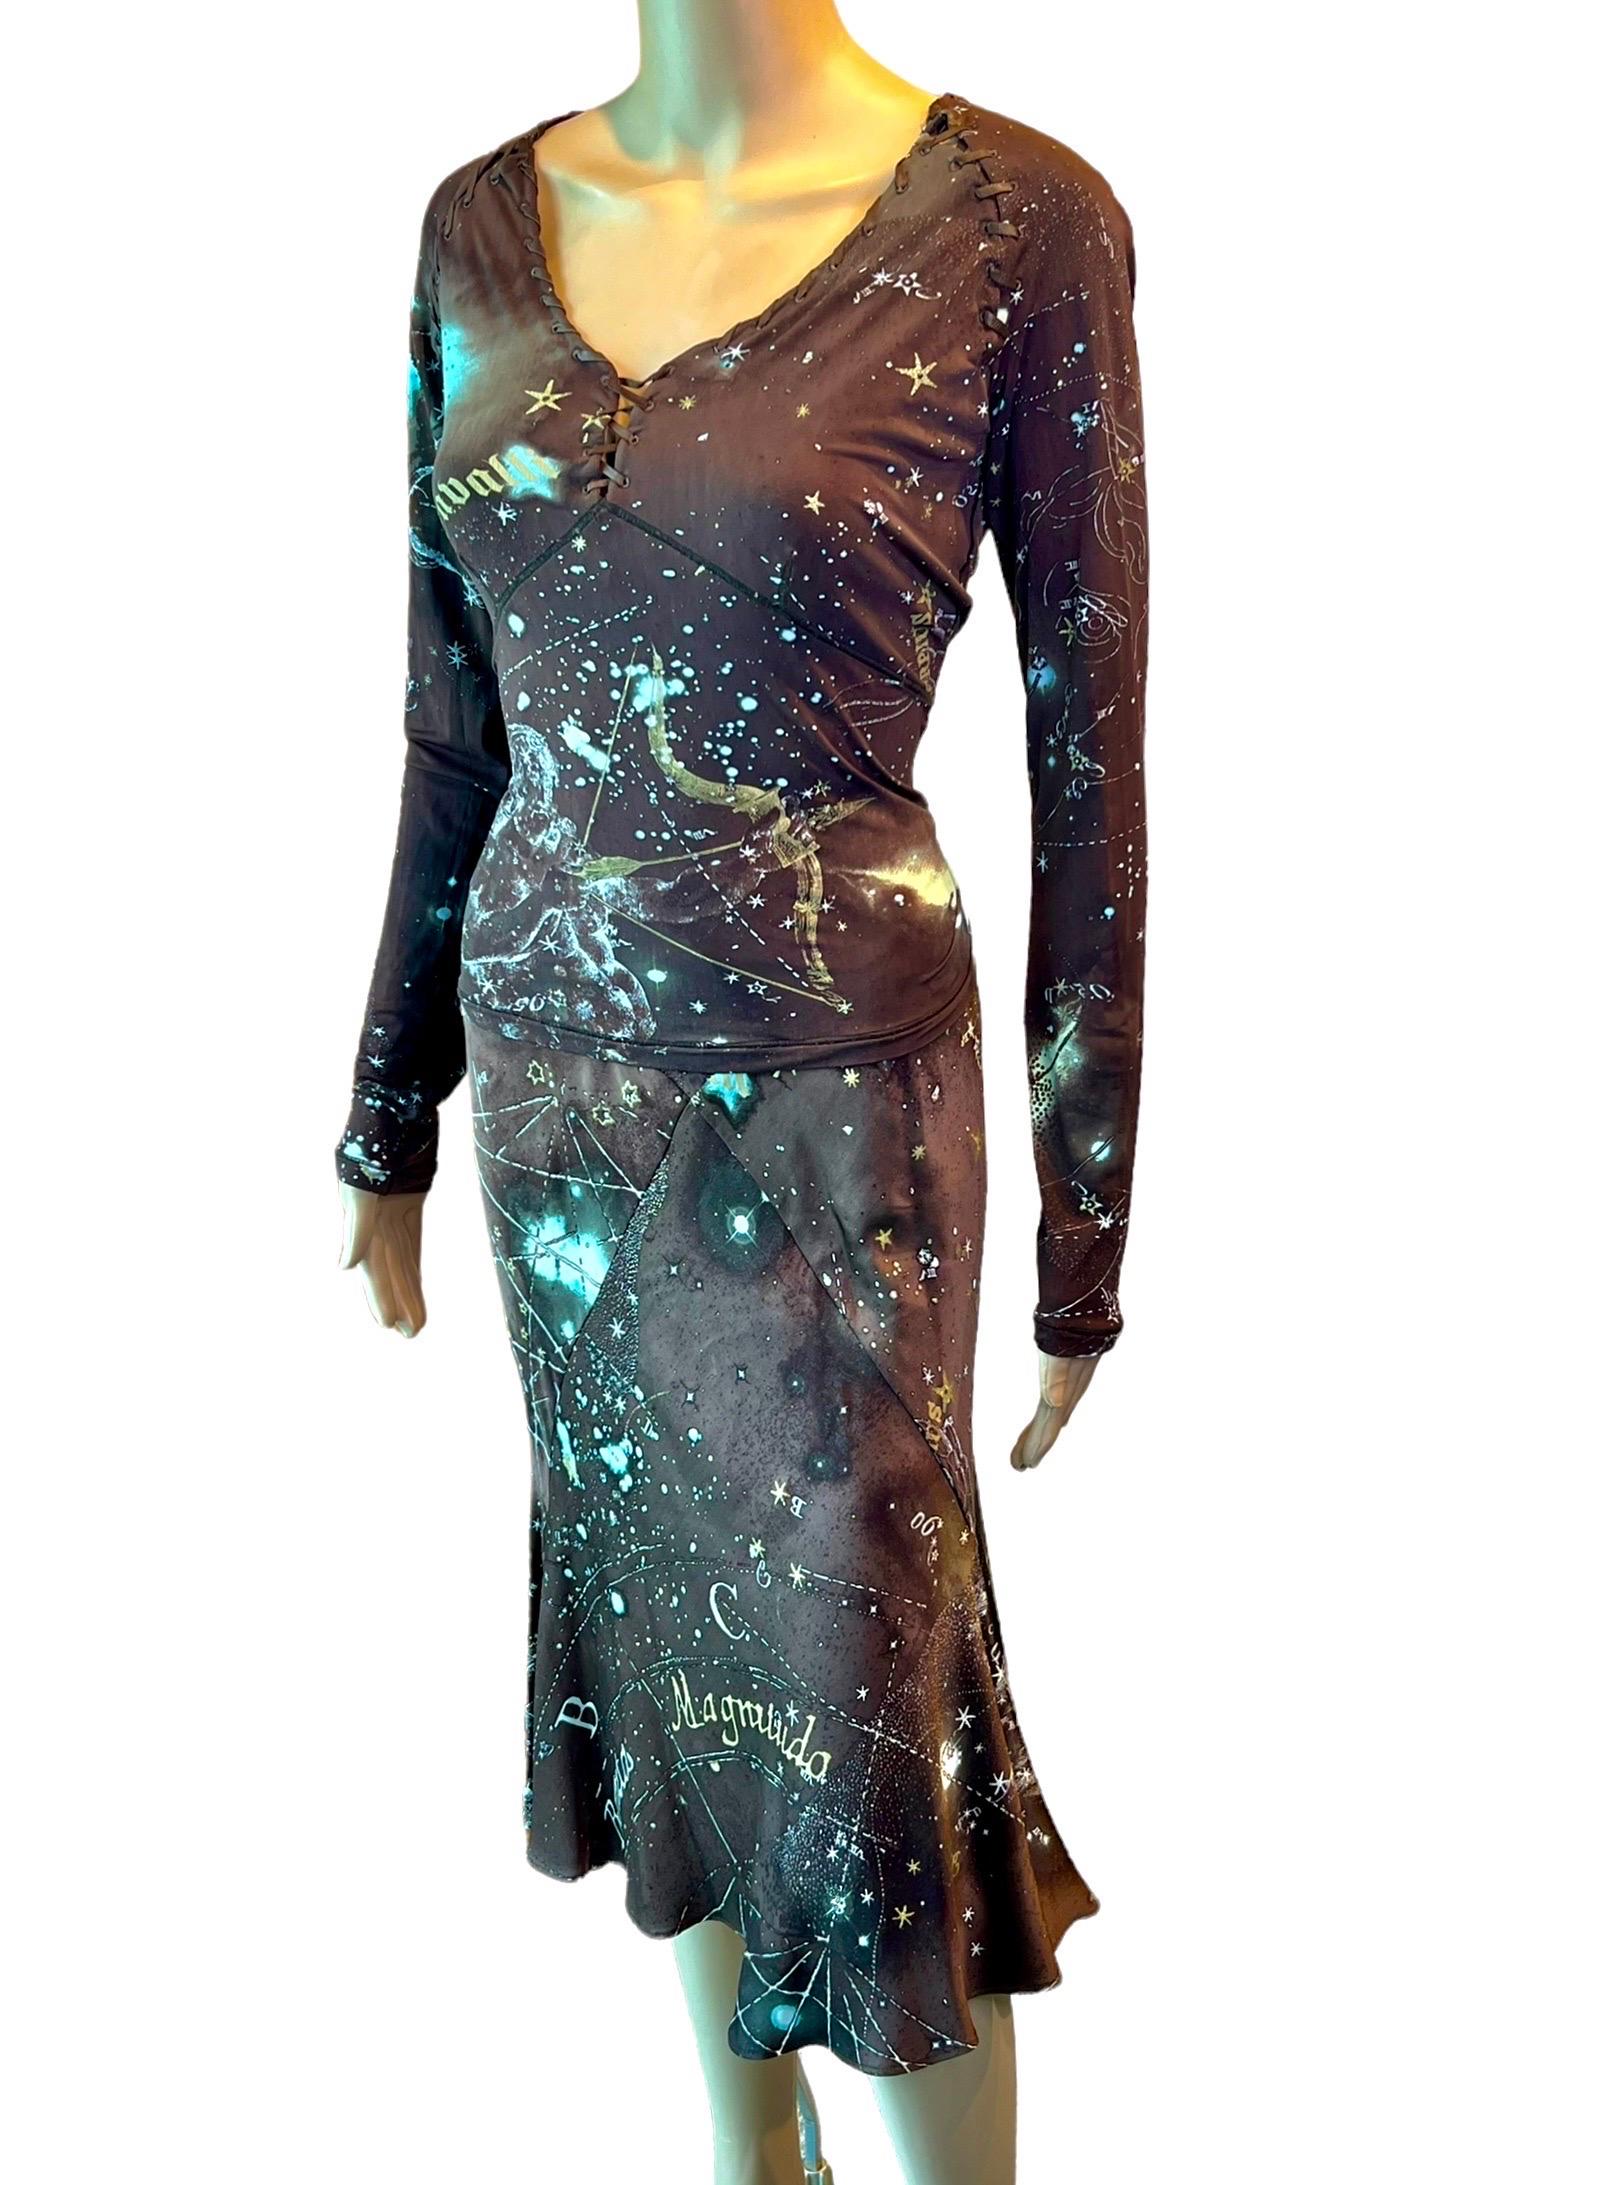 Roberto Cavalli F/W 2003 Constellation Astrology Print Skirt and Top 2 Piece Set In Good Condition For Sale In Naples, FL